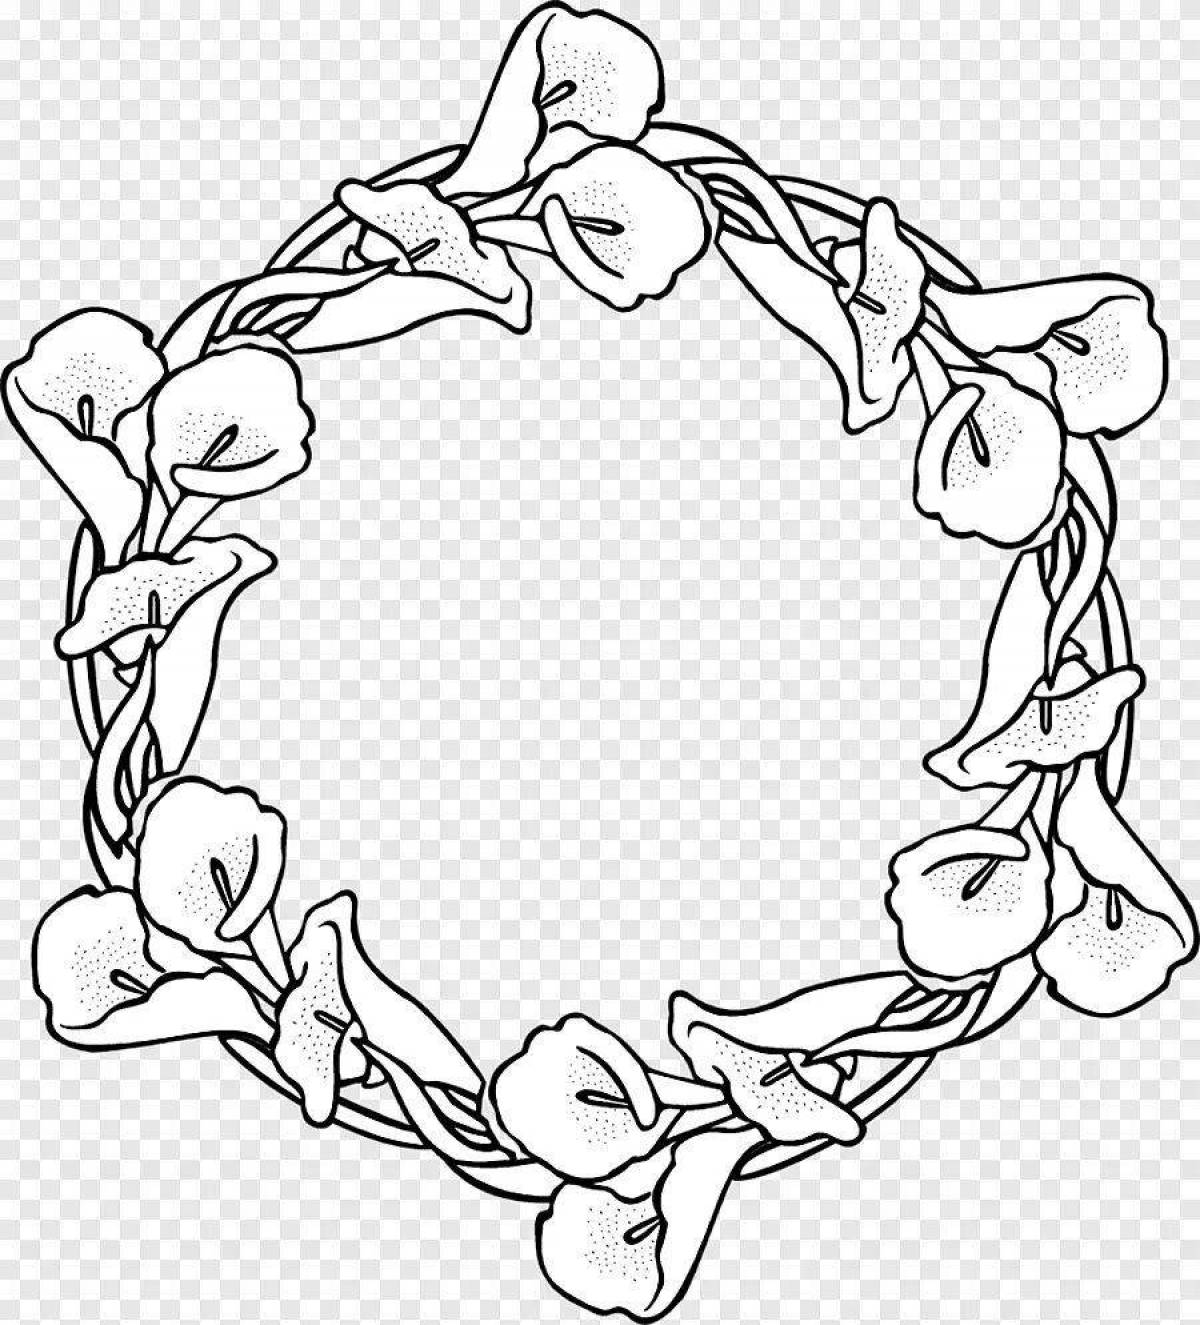 Playful wreath coloring page